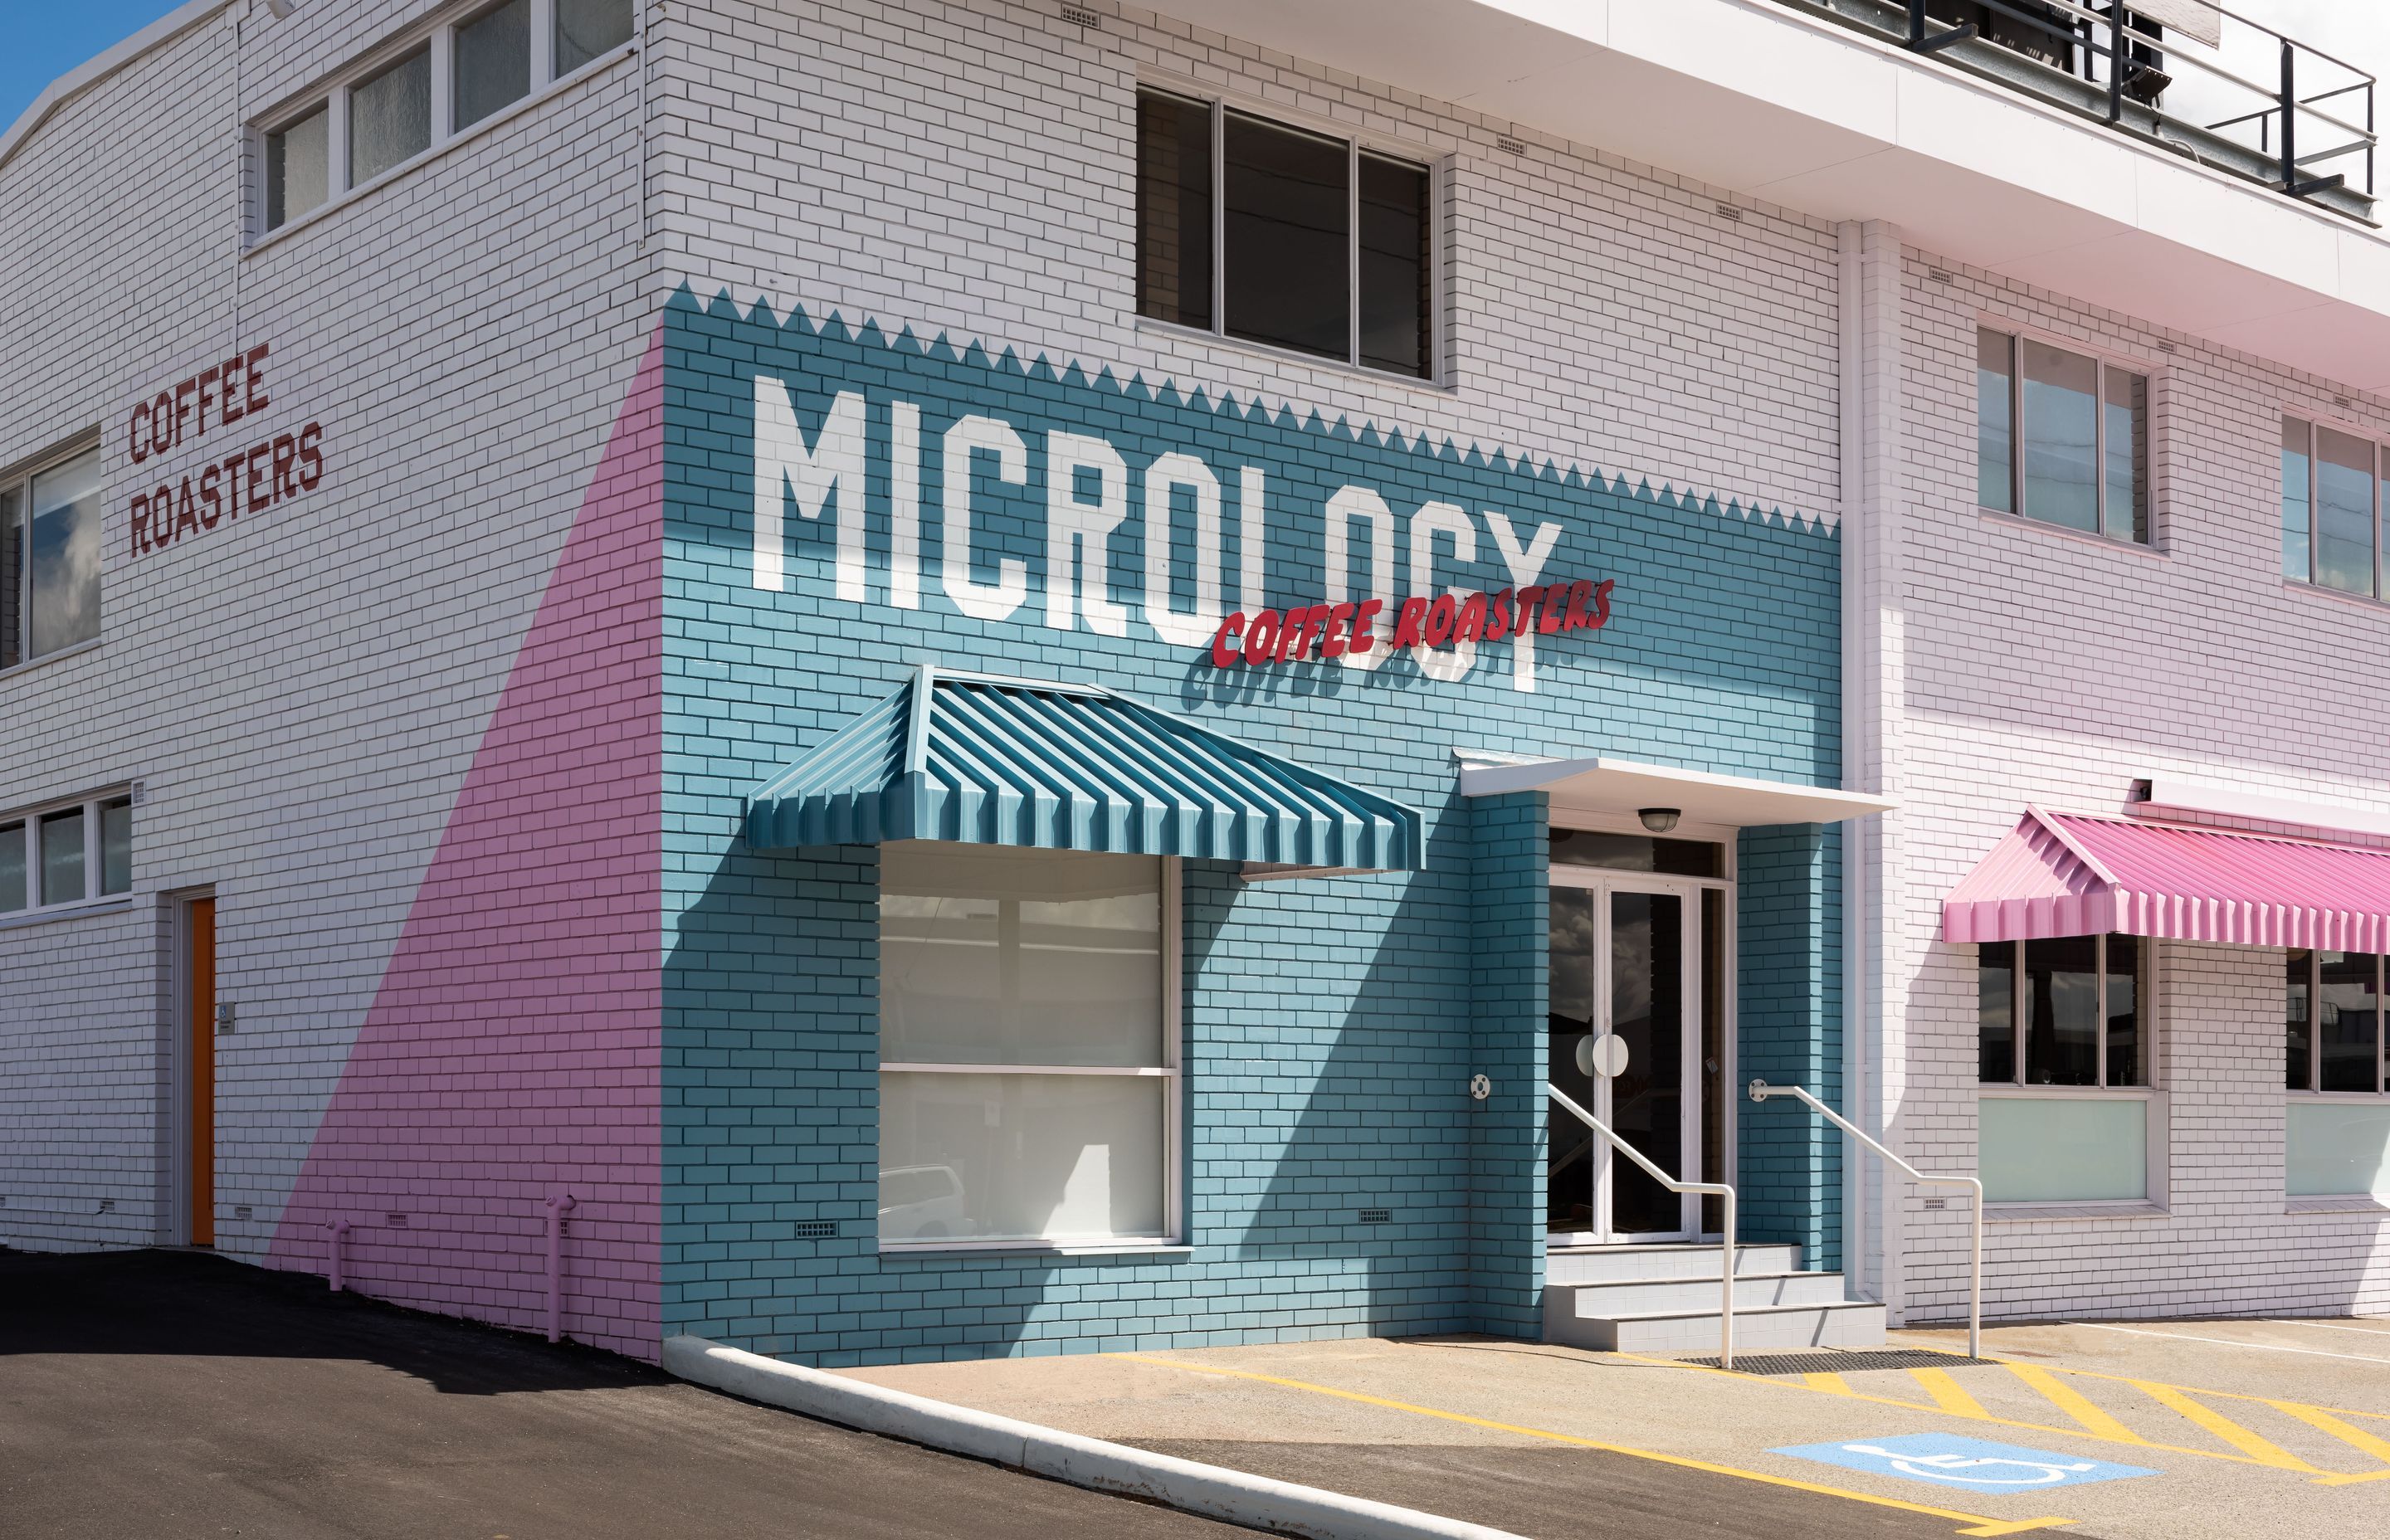 Micrology by studio gram | Photography by Dion Robeson